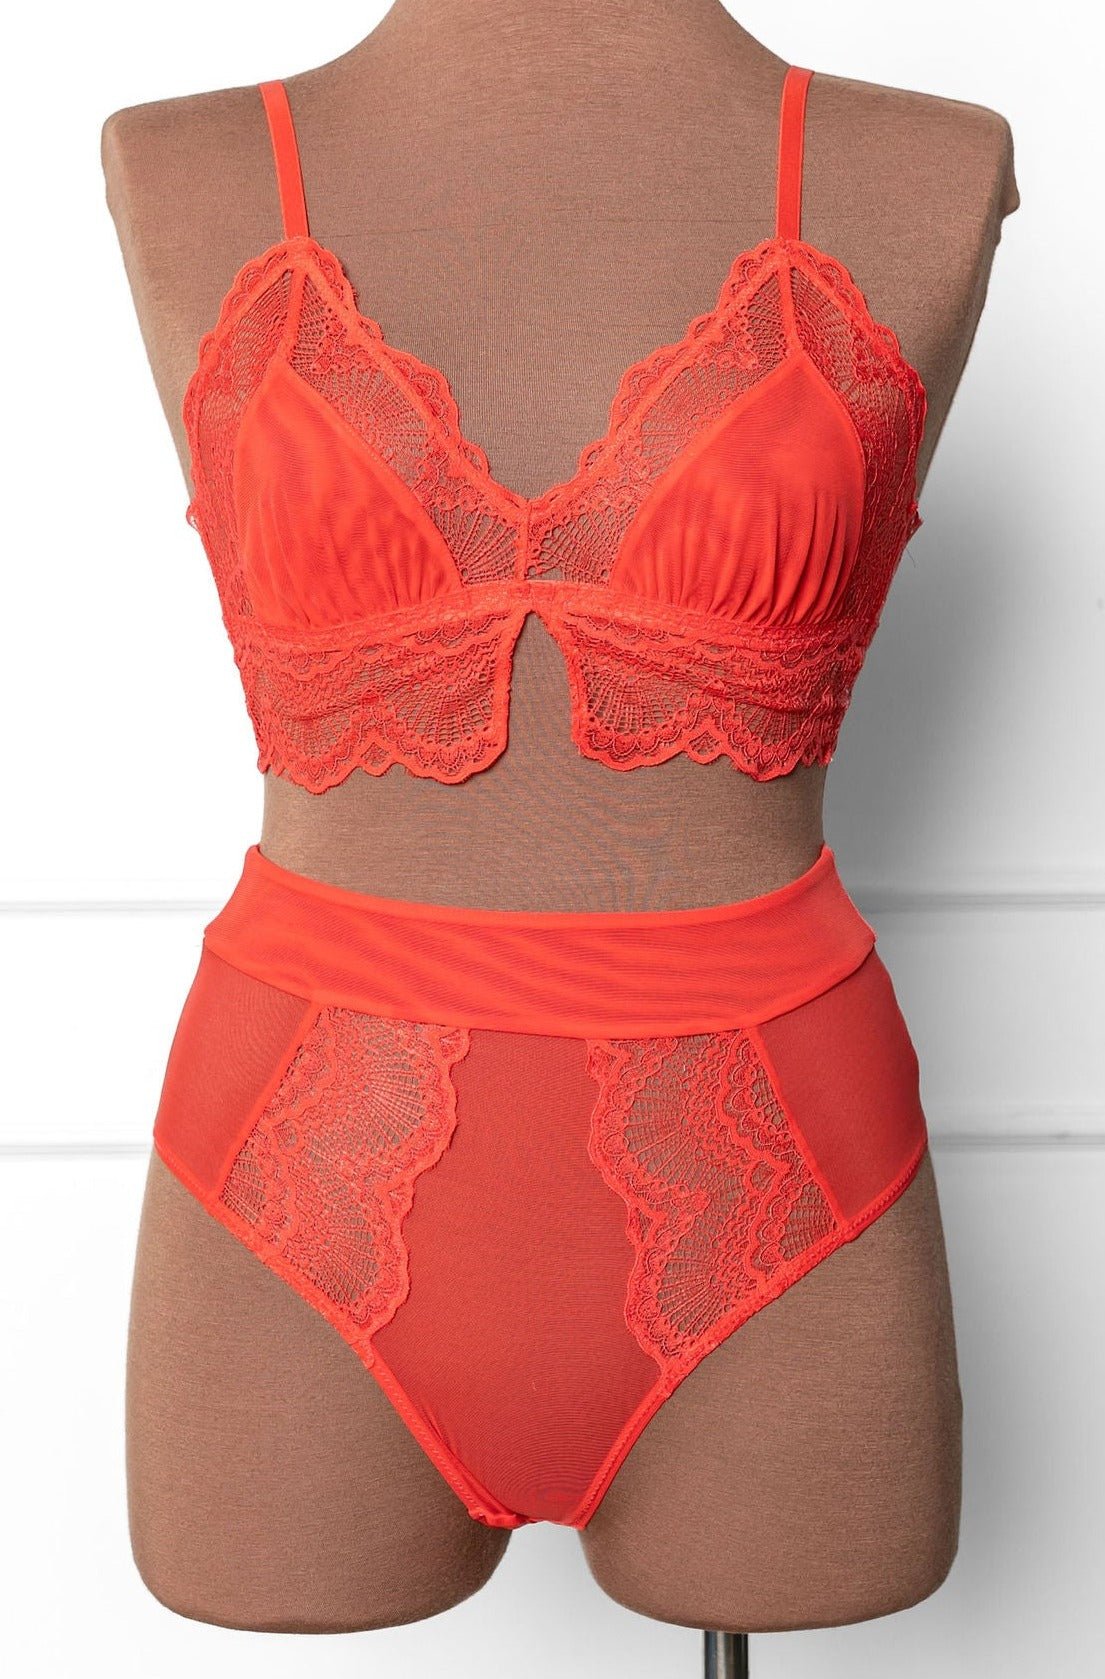 Lace & Mesh Bralette - Poppy Red - Mentionables